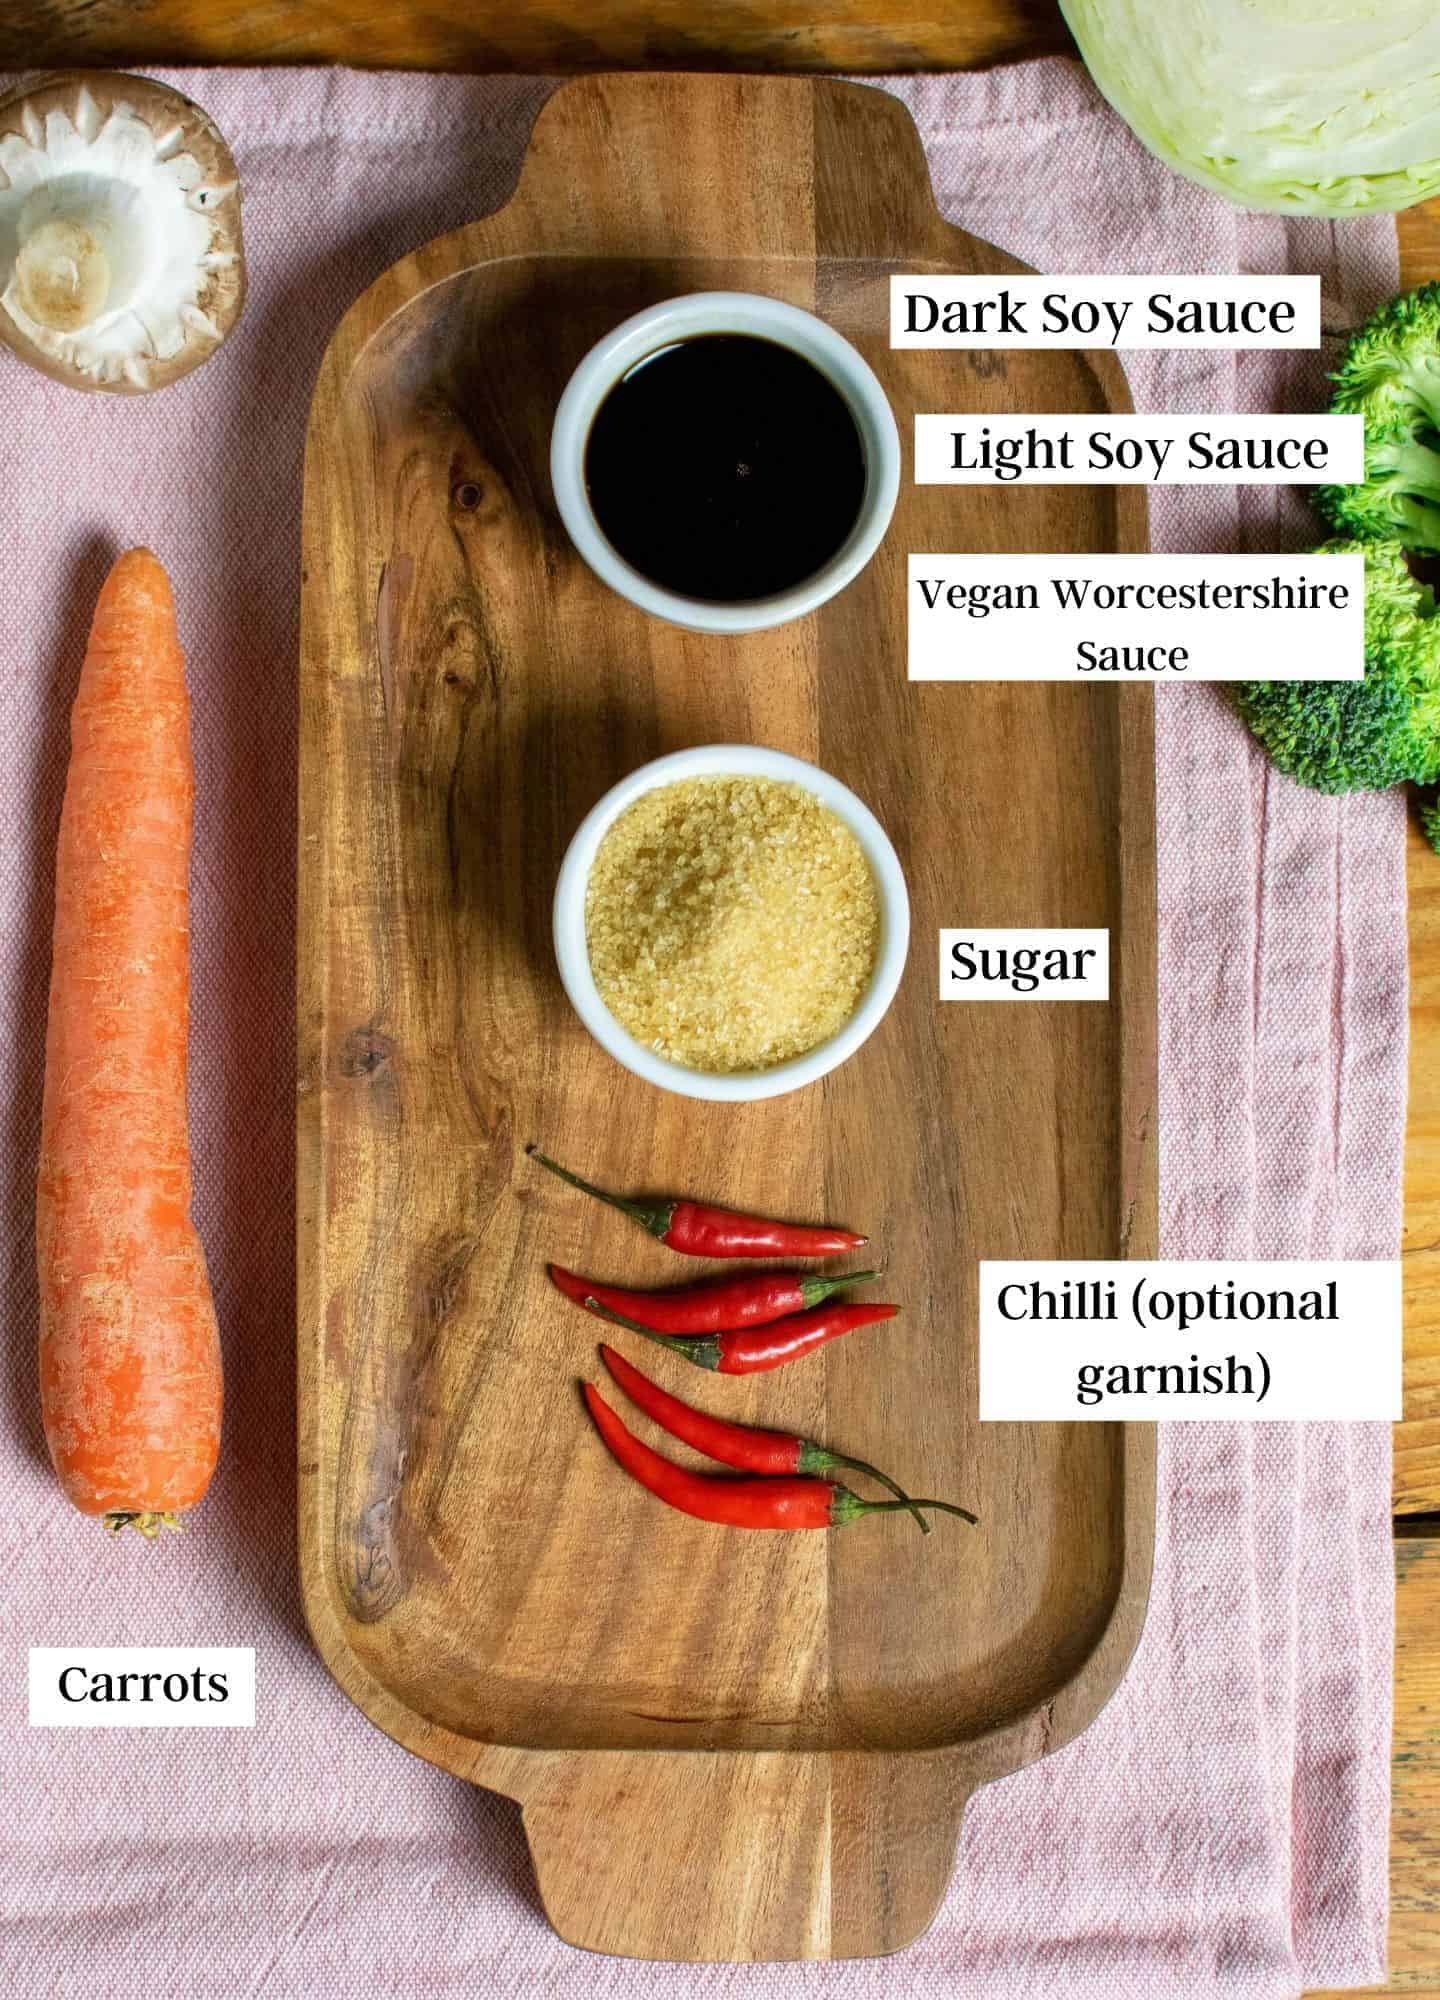 Ingredients laid out on a chopping board, focusing on the soy sauces, sugar and chillies for garnish